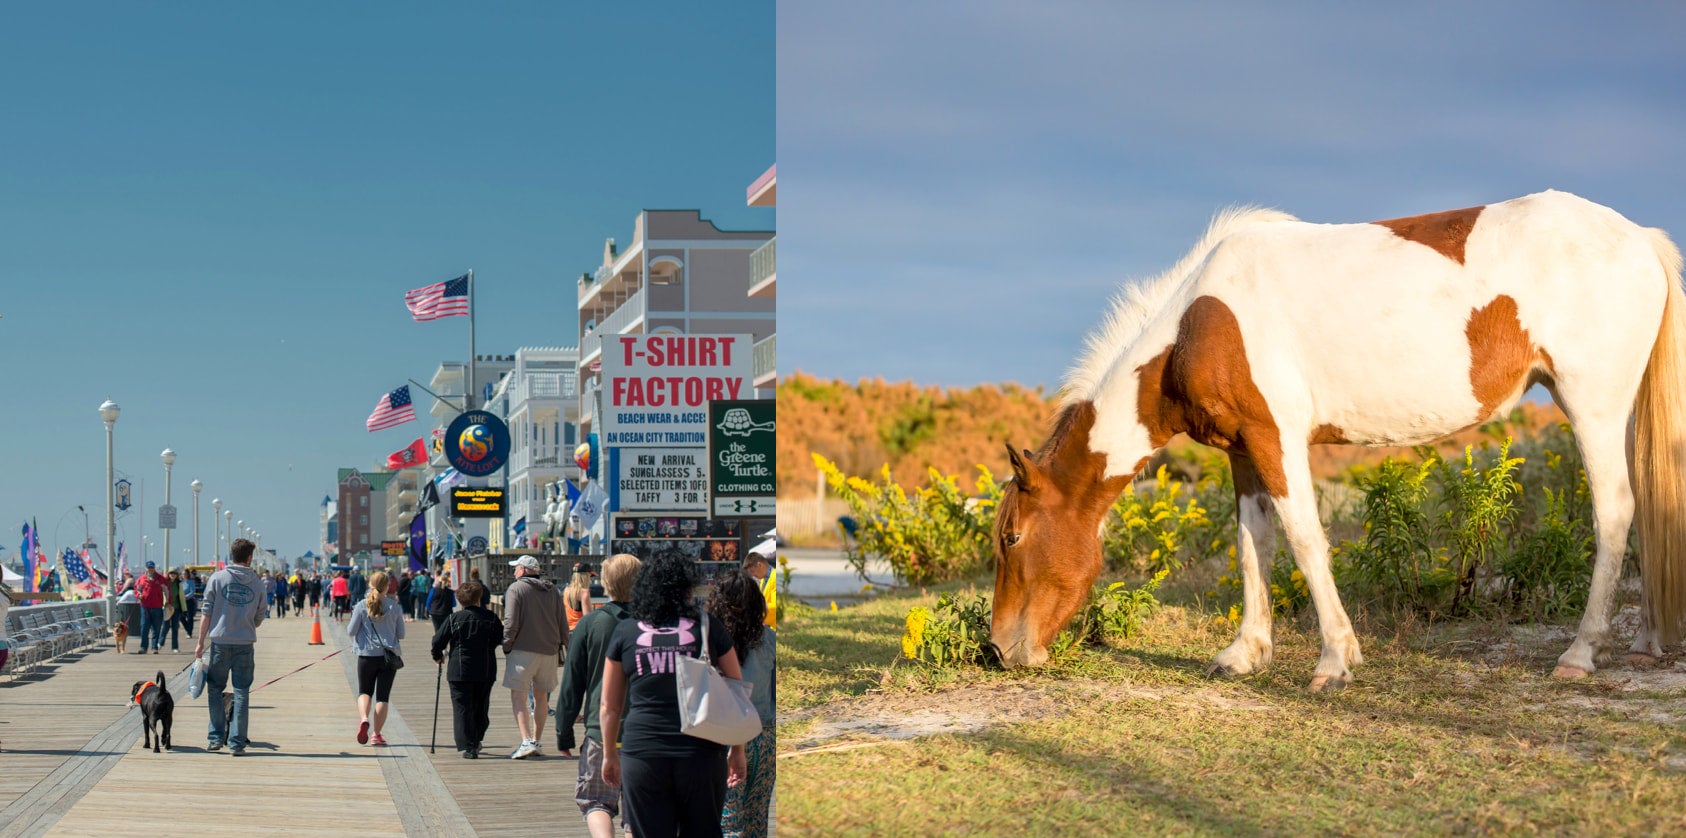 Wild Horses & Boardwalk Fun at Campgrounds near Ocean City, Maryland